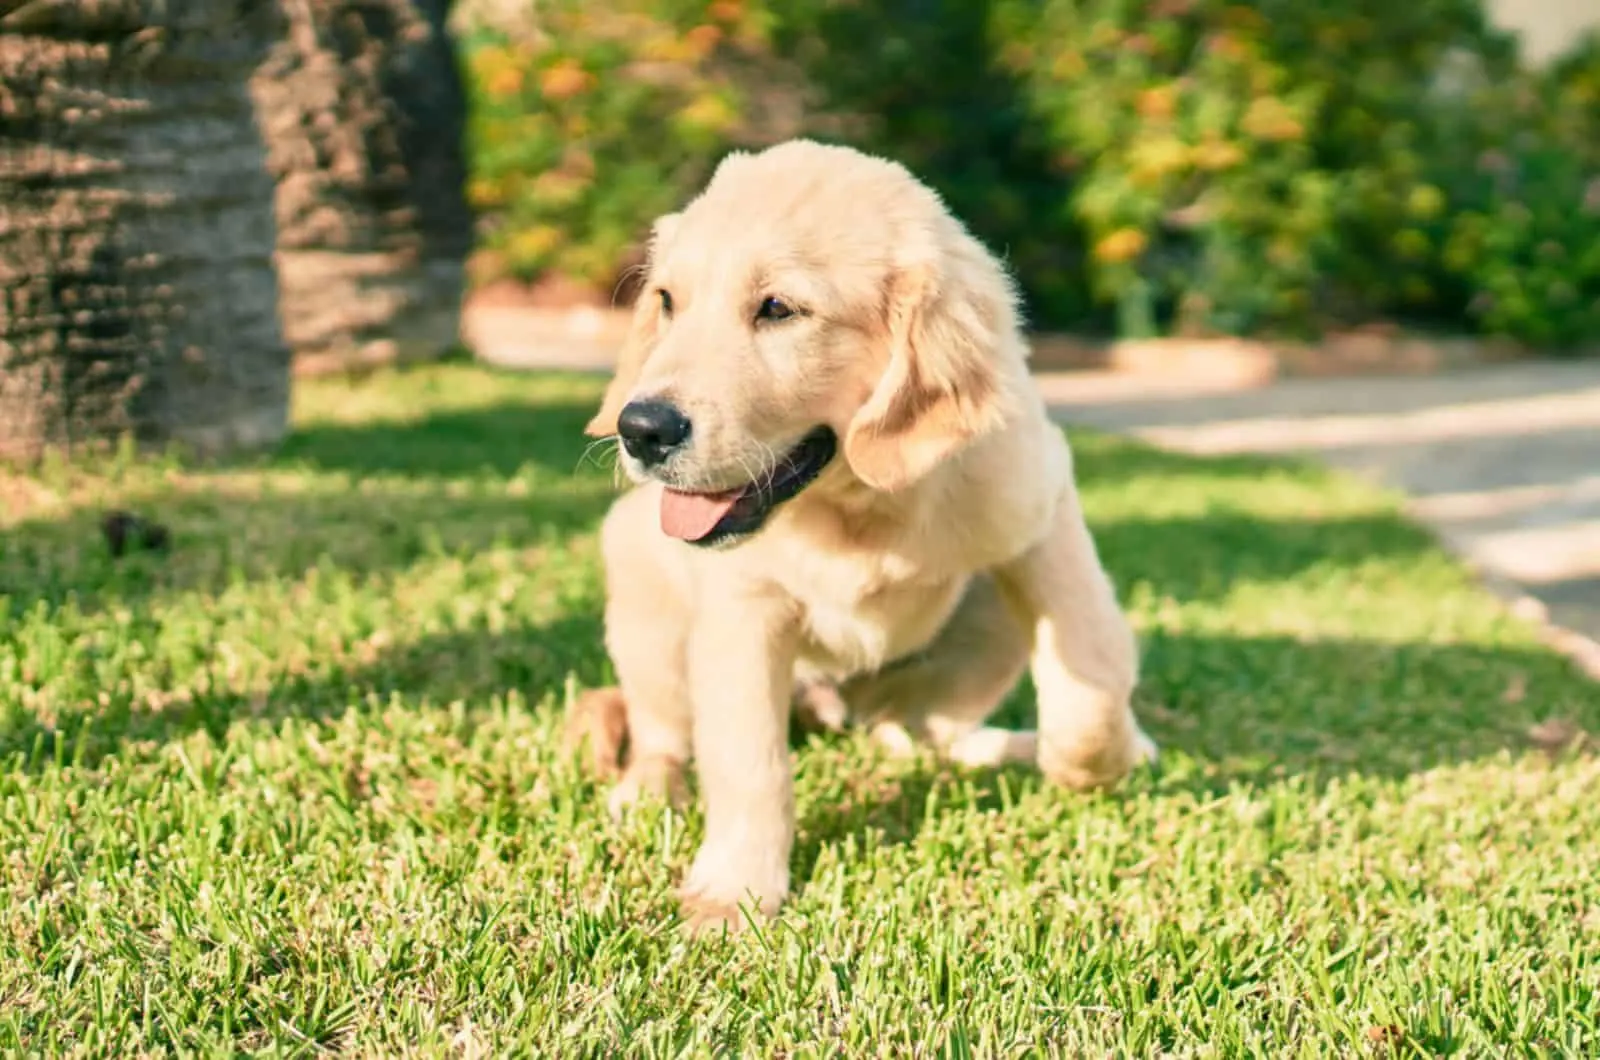 adorable golden retriever puppy sitting on the lawn